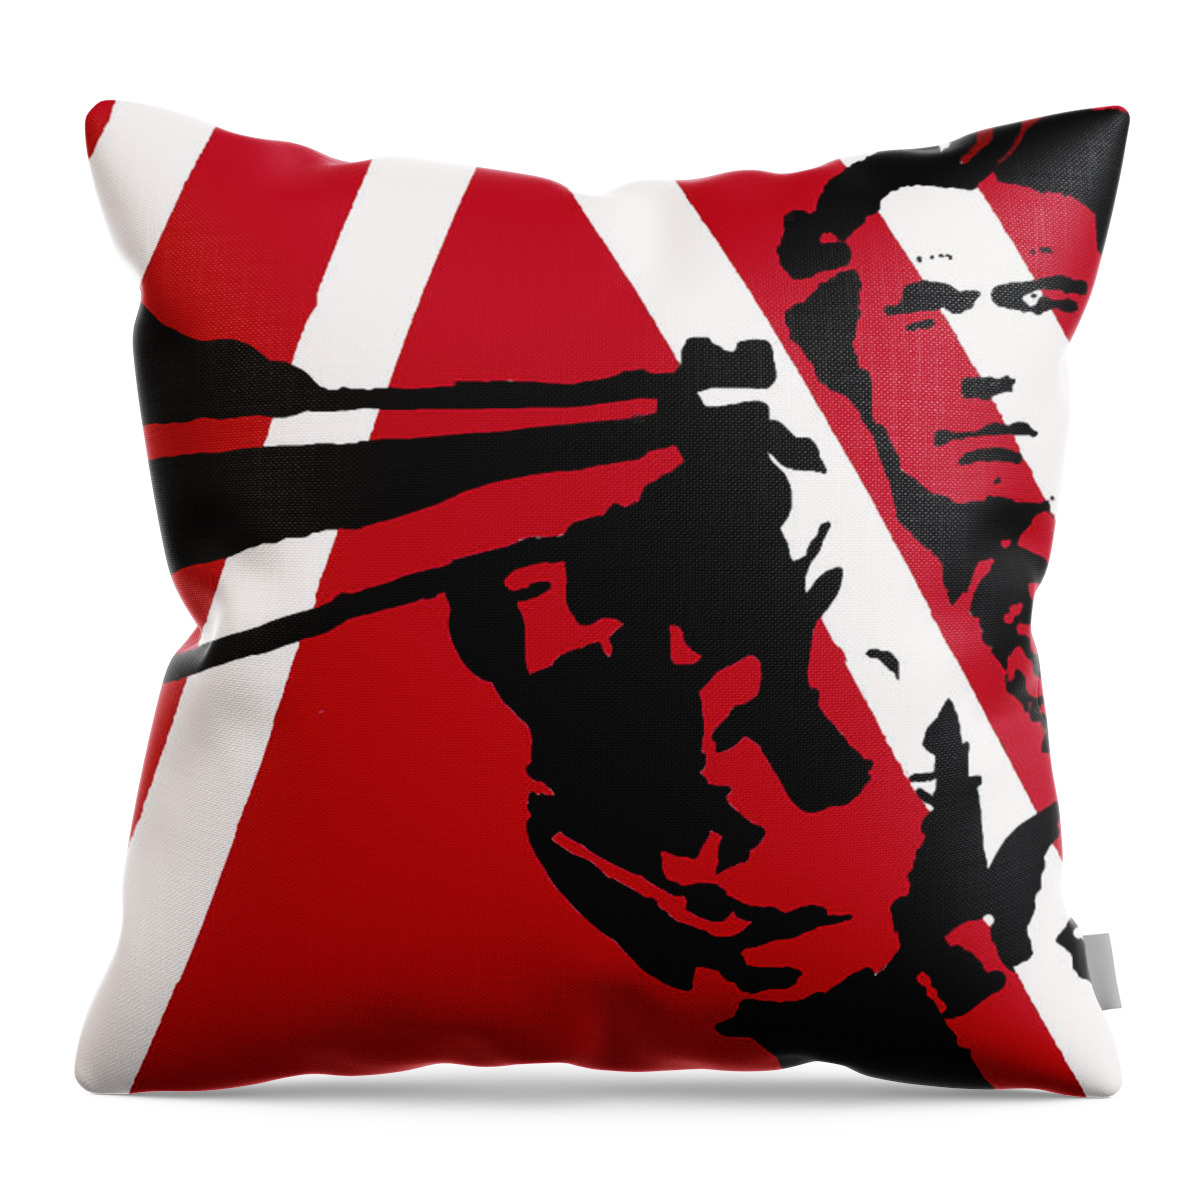 Clint Eastwood Throw Pillow featuring the painting Go Ahead And Make My Day by Robert Margetts